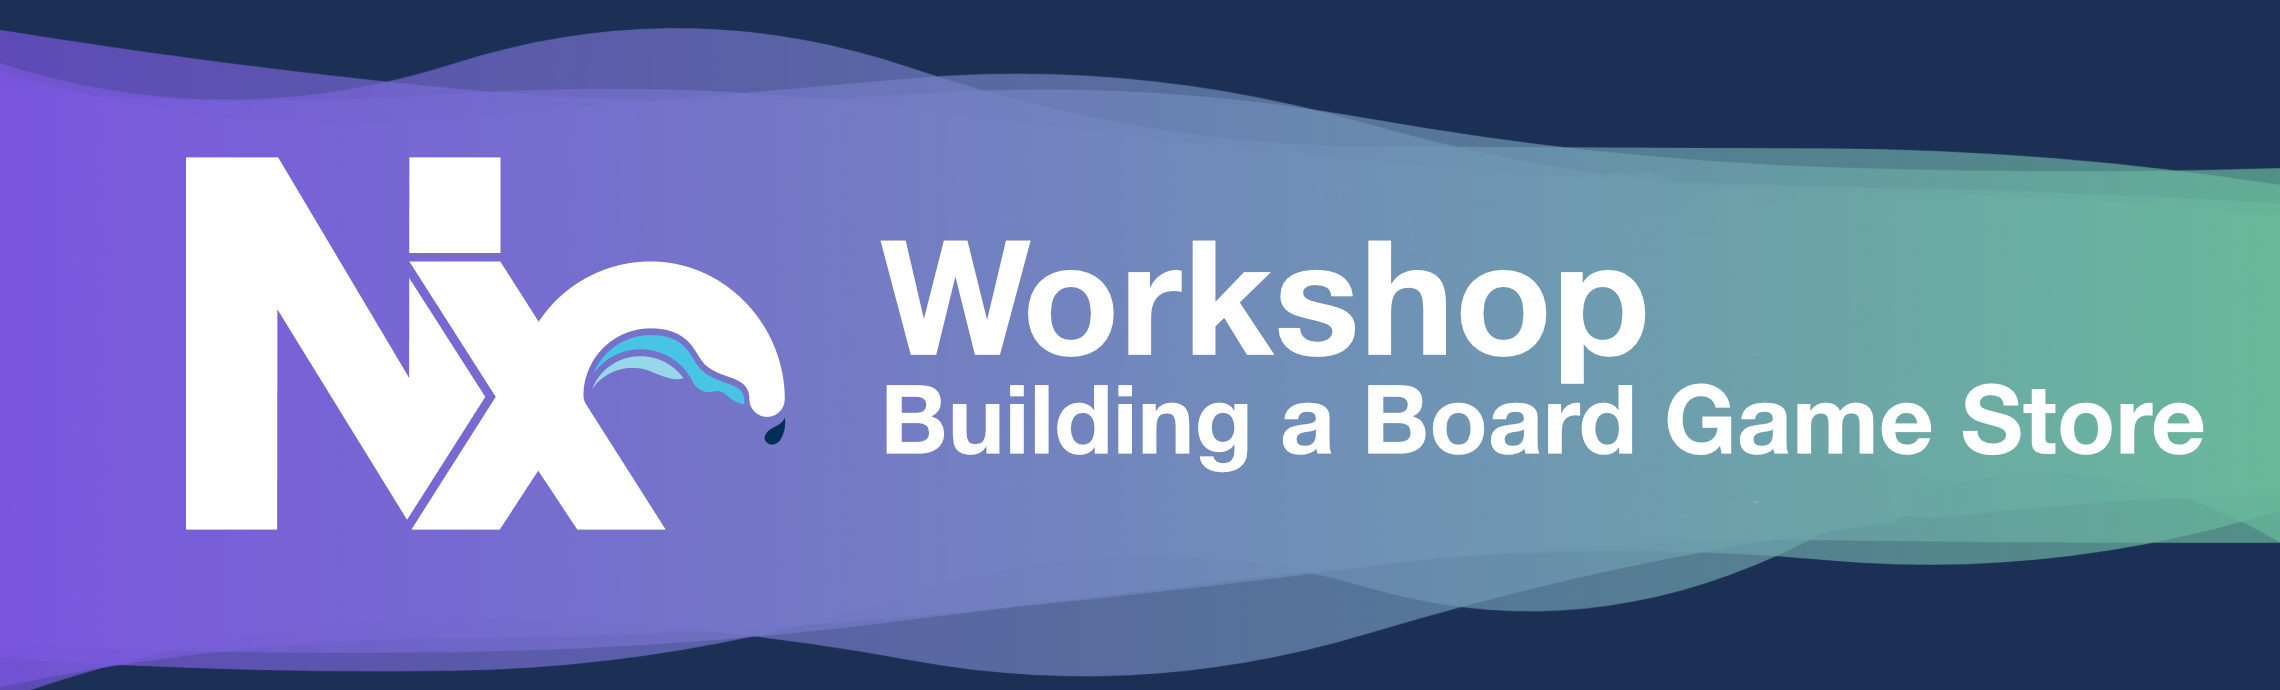 Nx Workshop - Building a Board Game Store